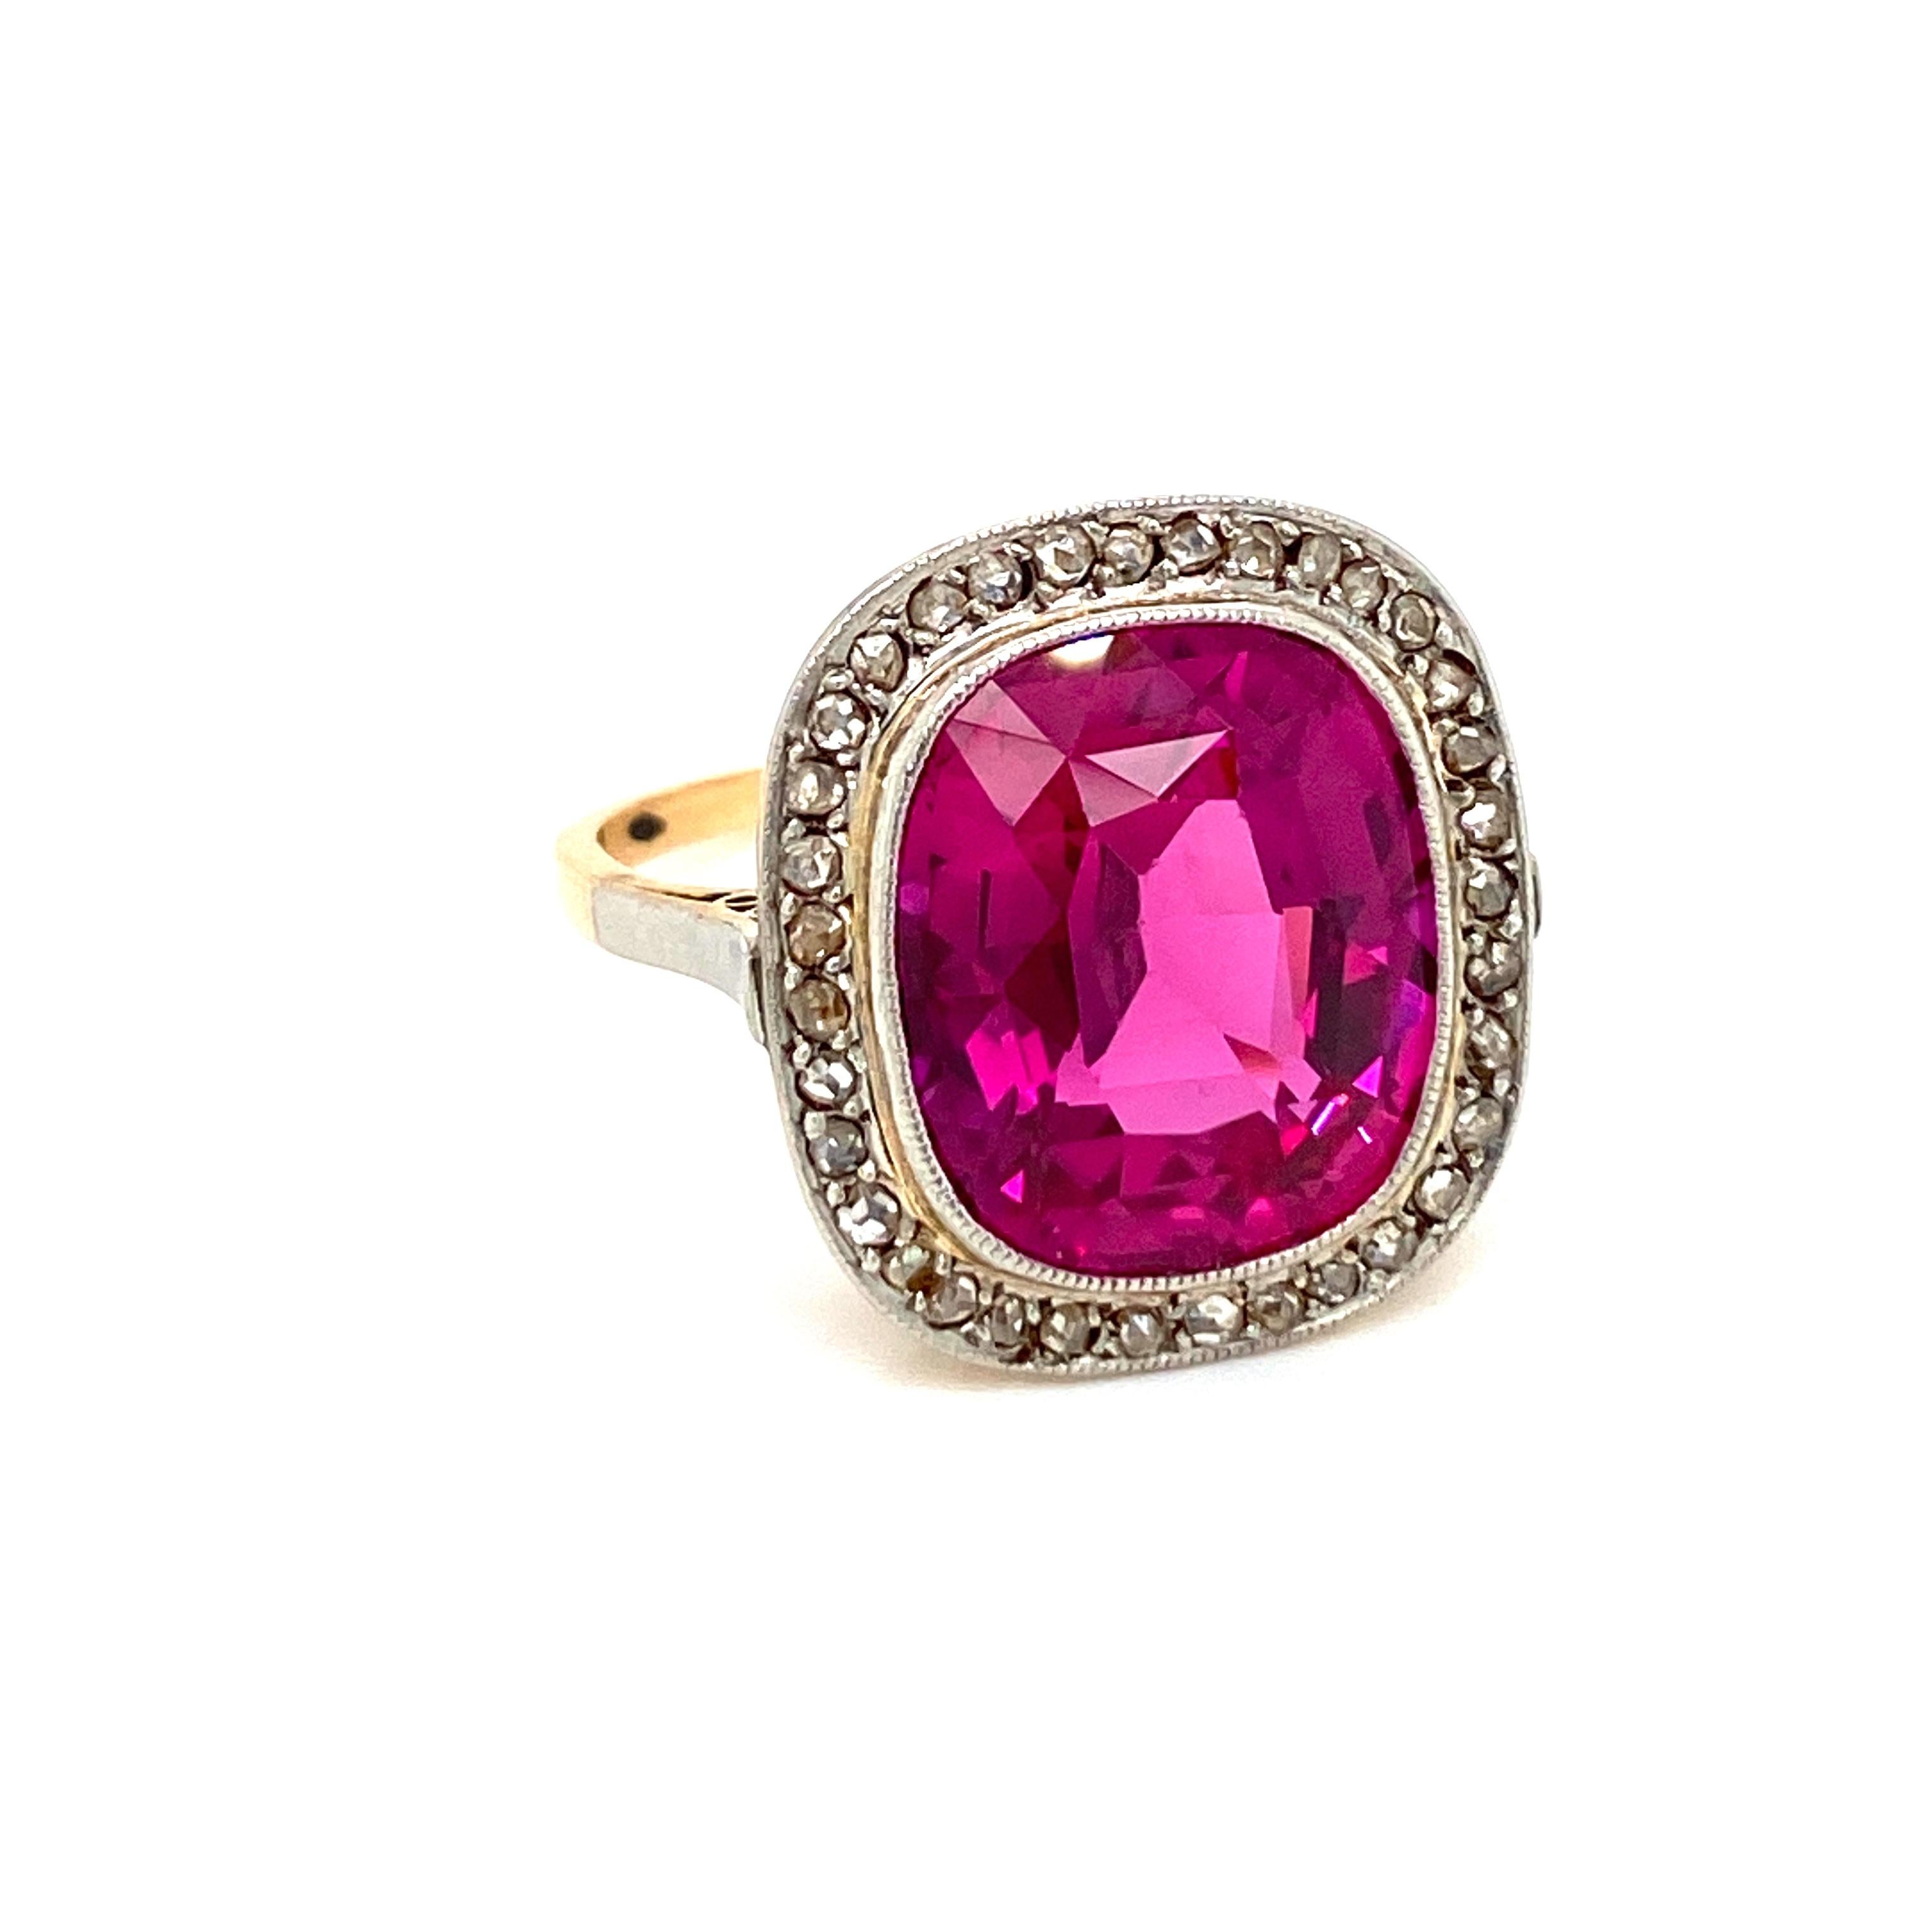 Antique 18K rose Gold Verneuil Synthetic Ruby and Diamond ring. 
The cluster style ring is centered with an approximately 6 carat stunning oval synthetic ruby, see note below, accented by an halo of old cut diamonds weighing approx. 0,40 carats